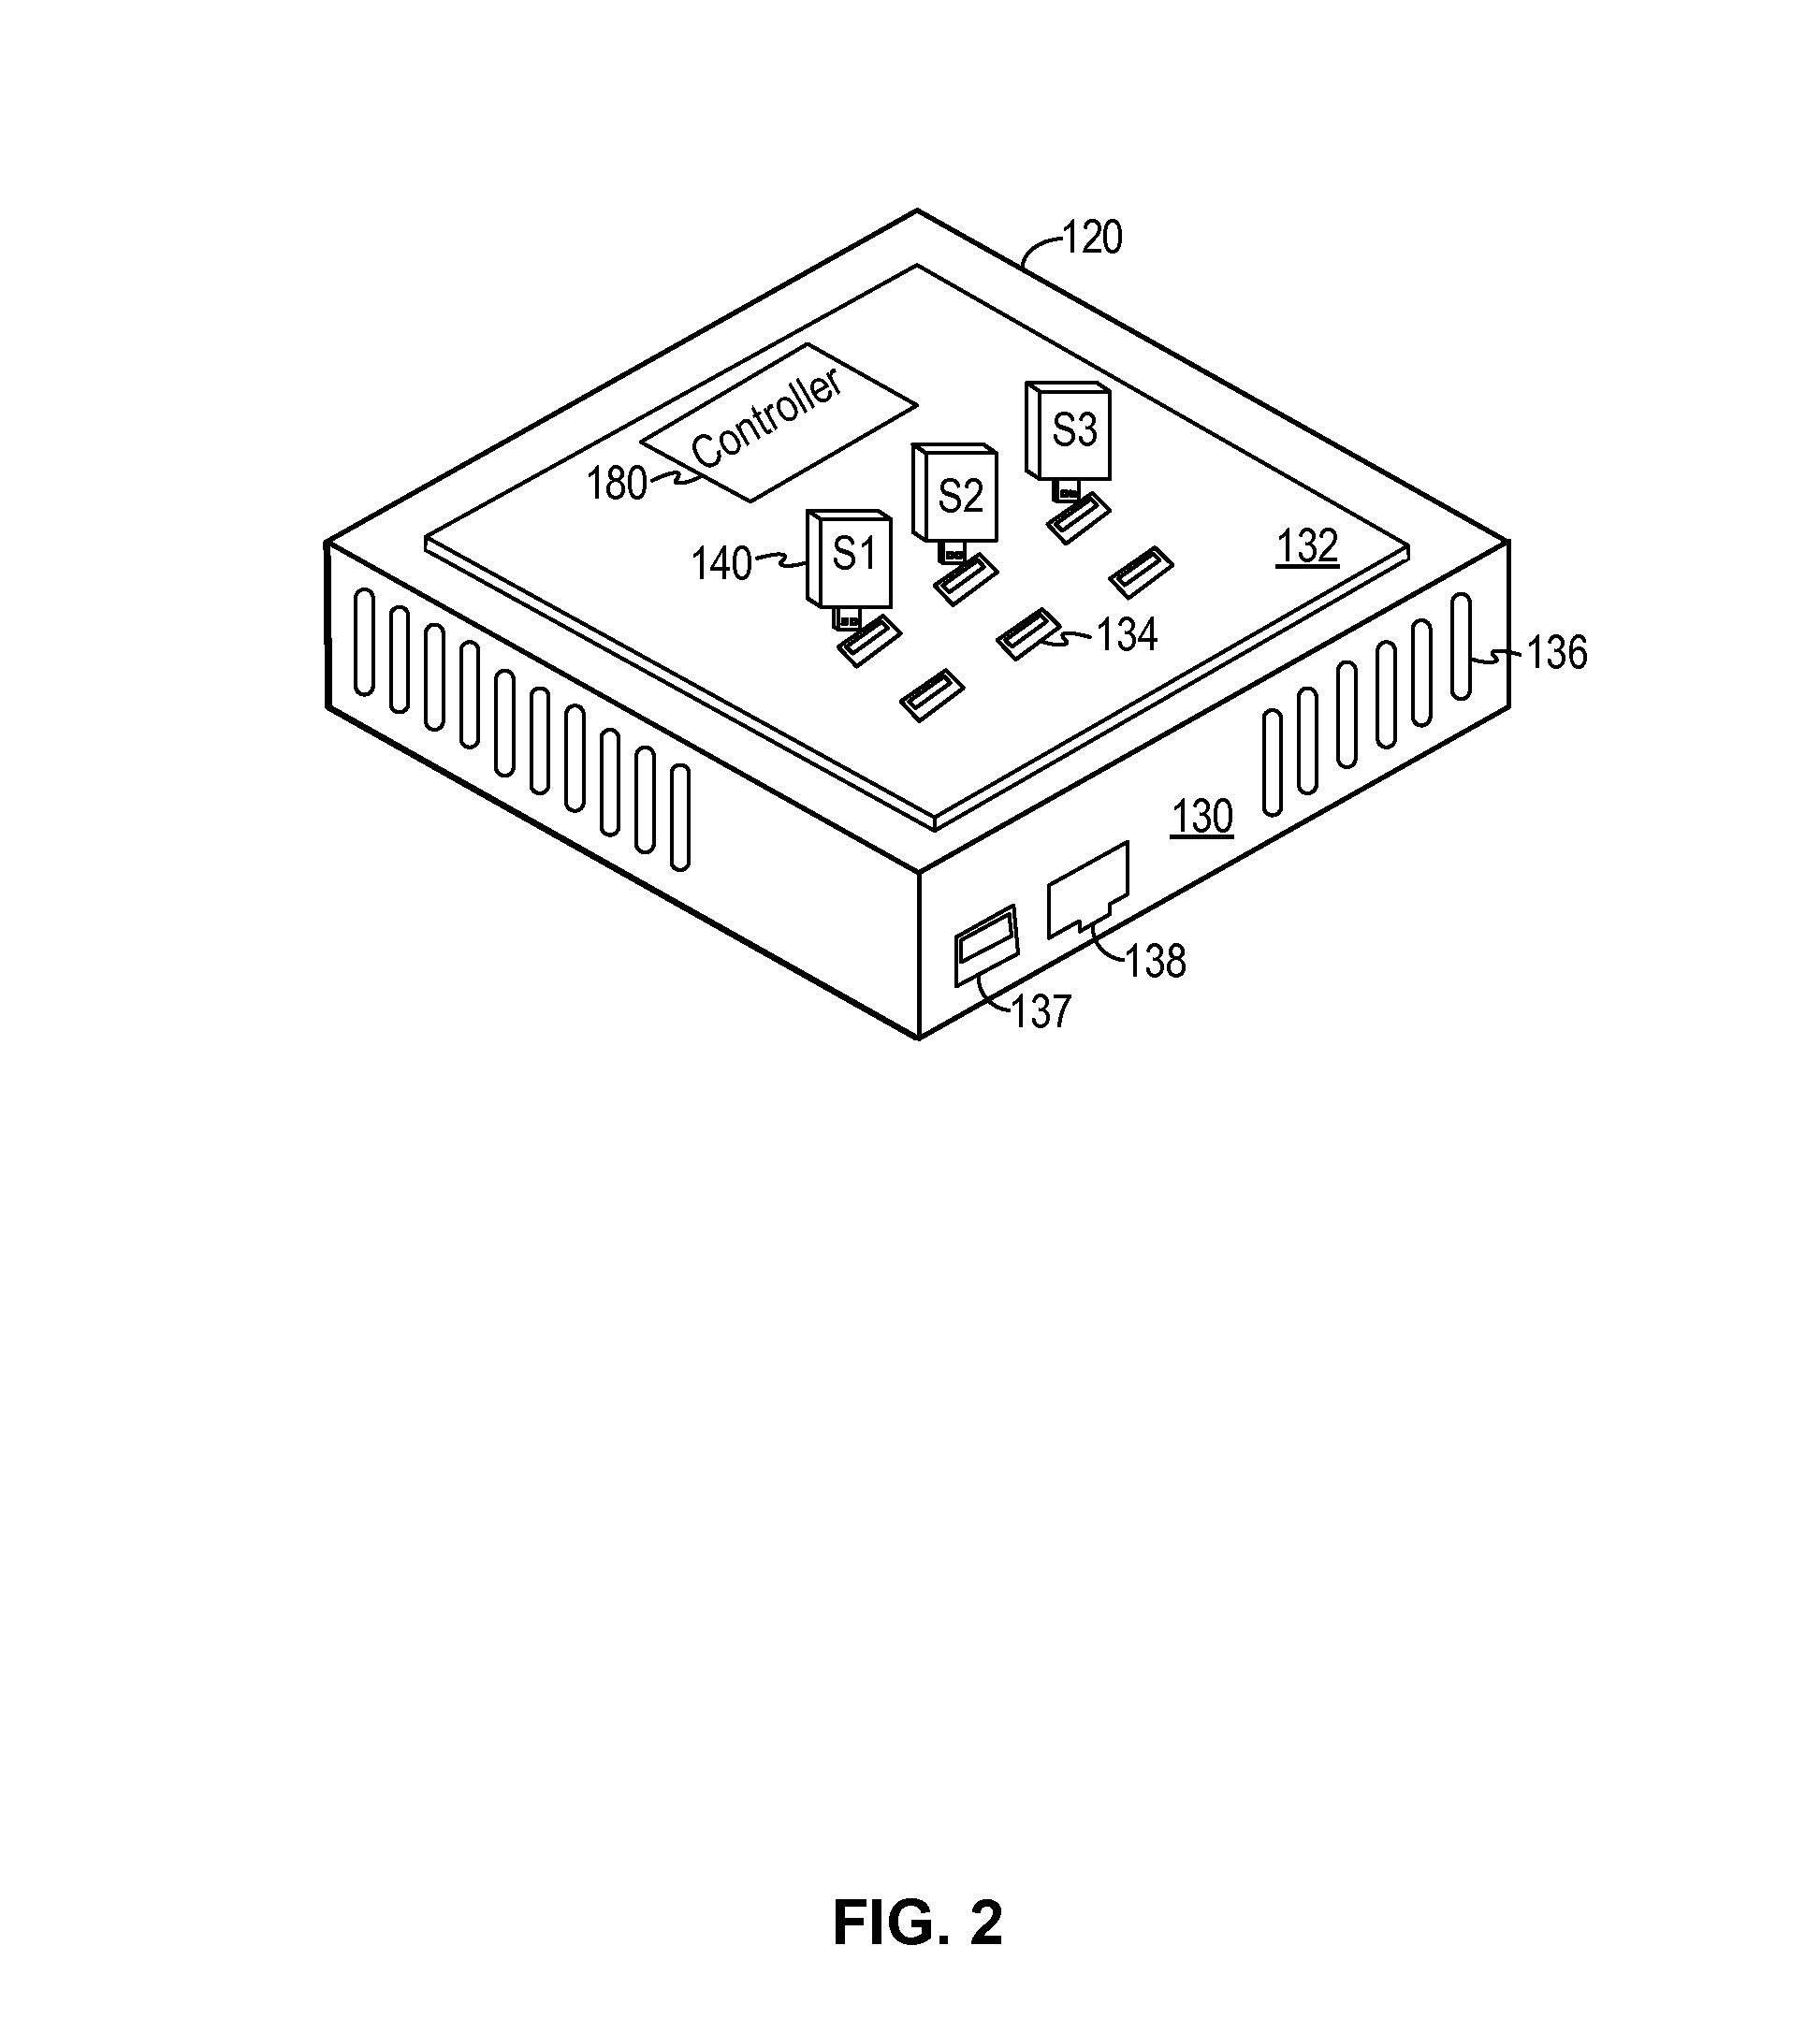 Distributed sensor system with remote sensor nodes and centralized data processing